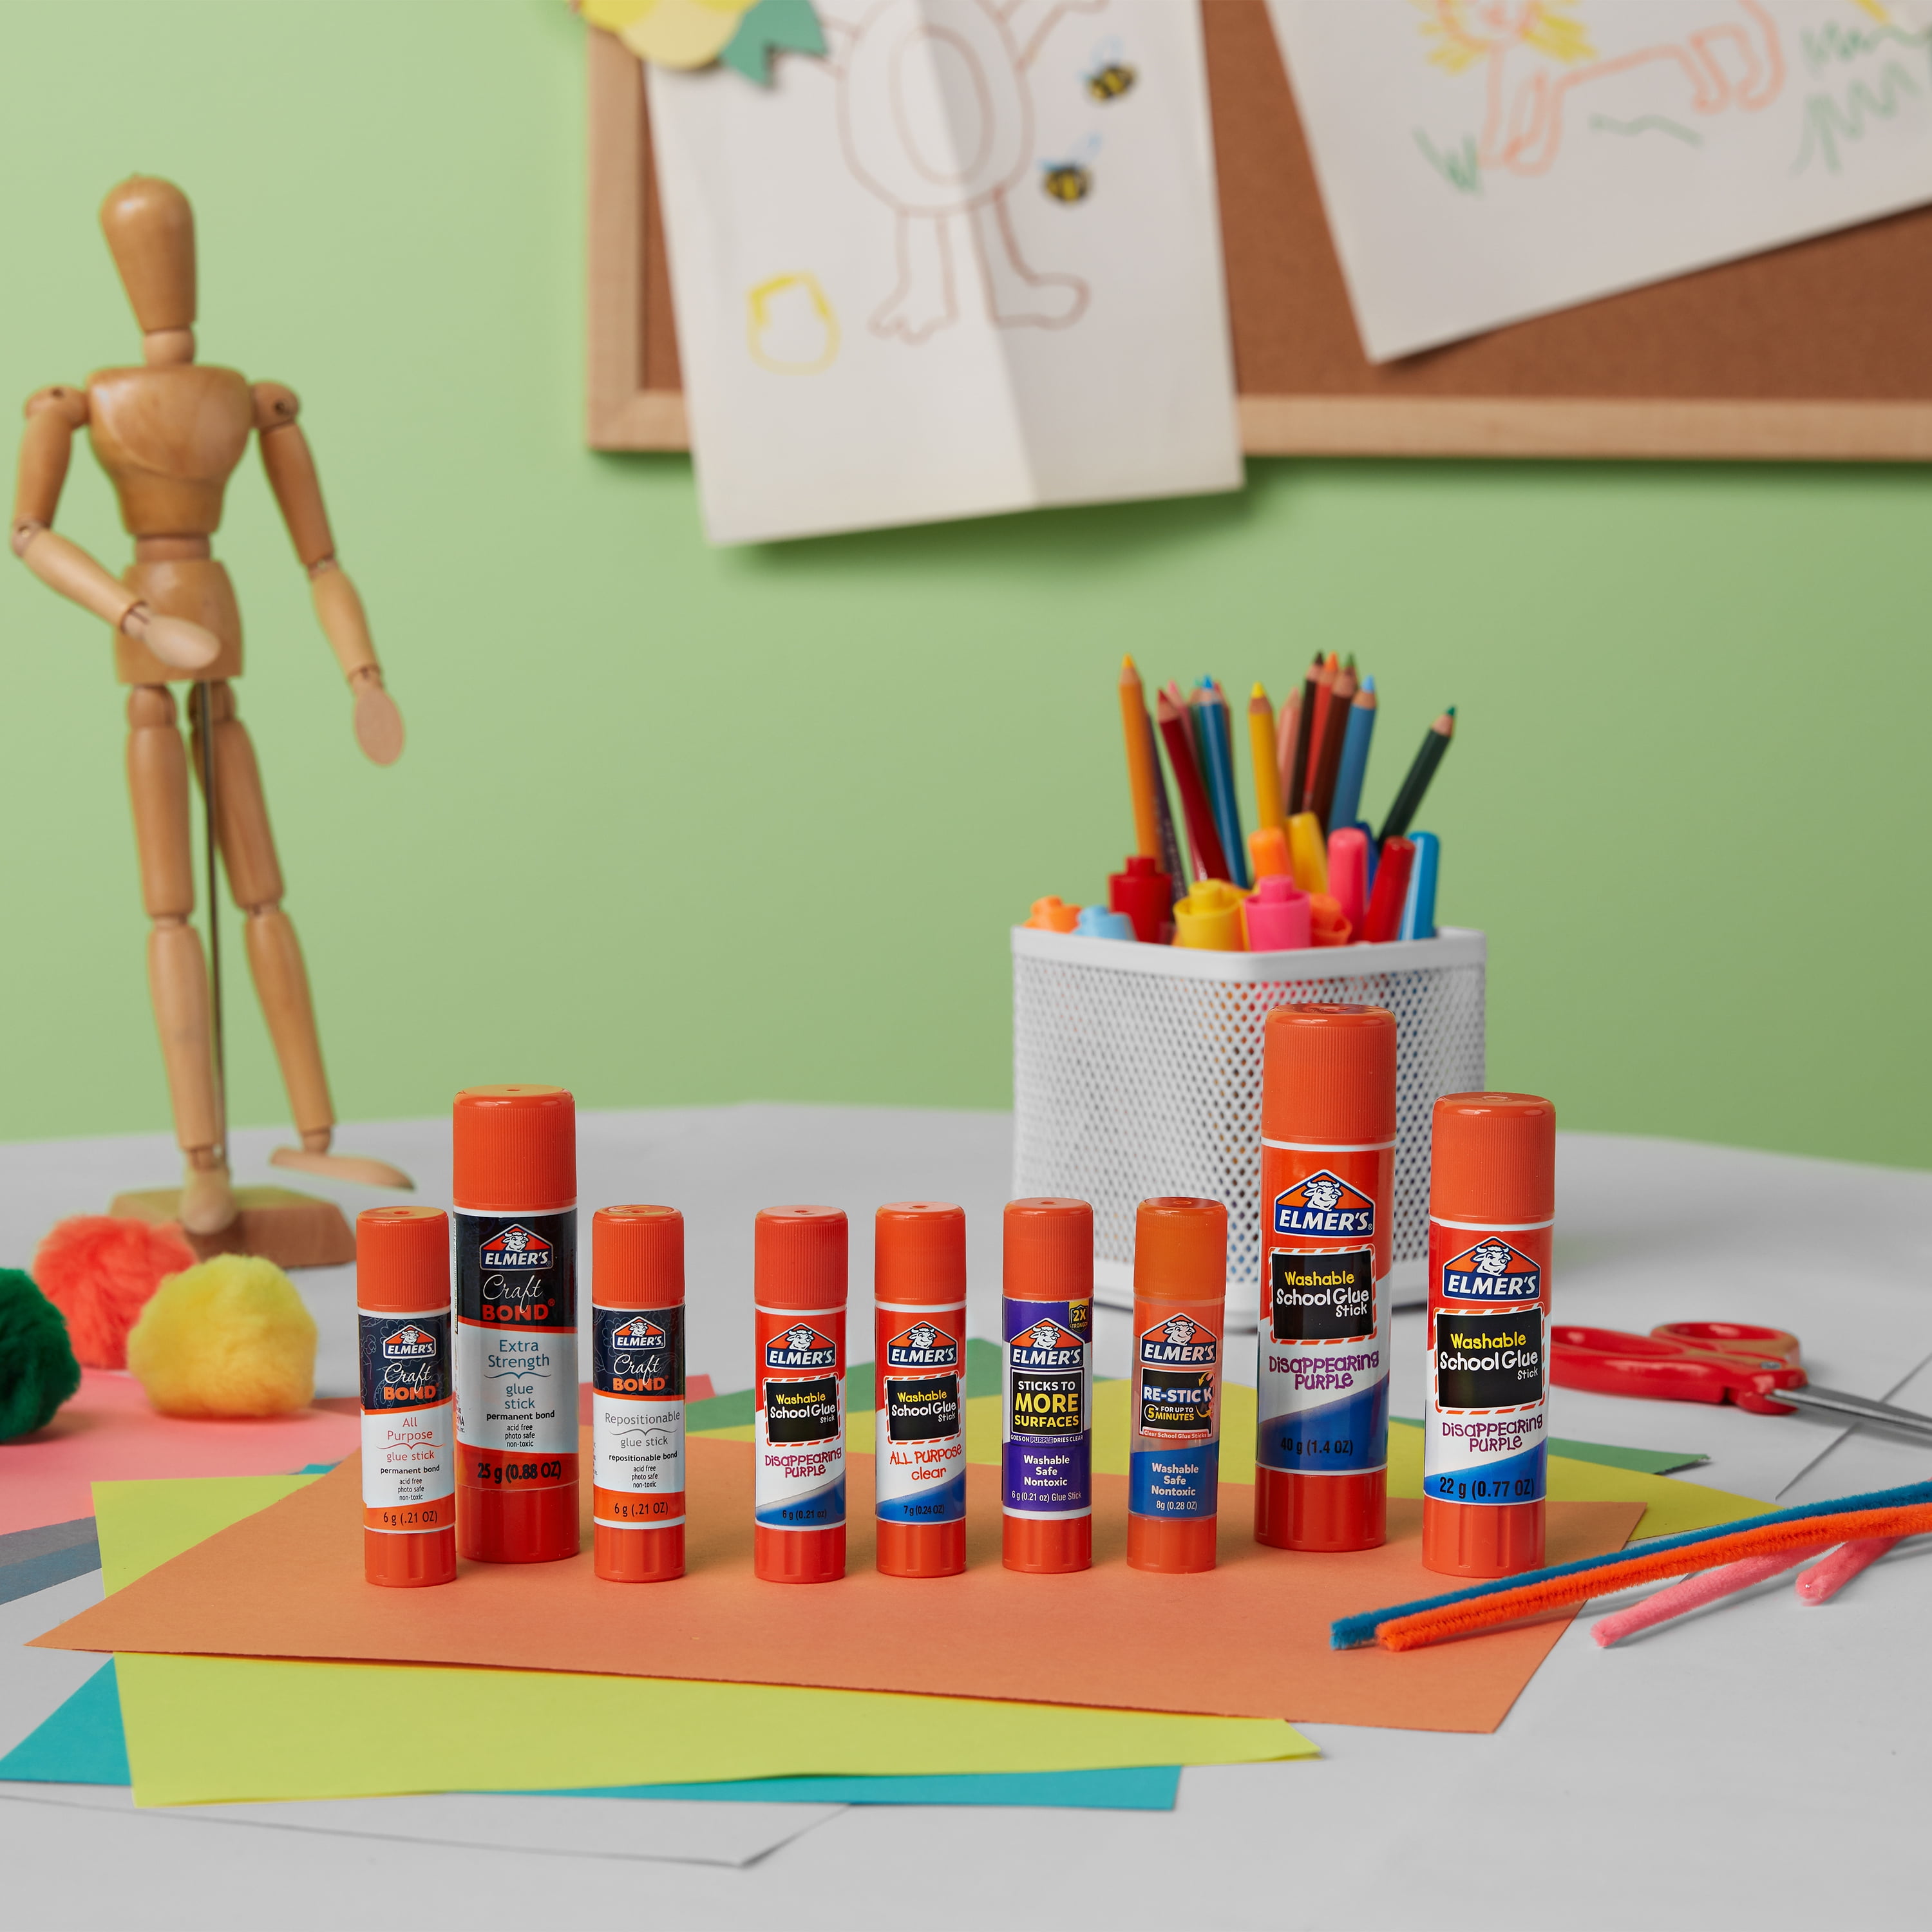 60 Pack of Elmer's Washable School Glue Sticks Just $11.23 (ONLY